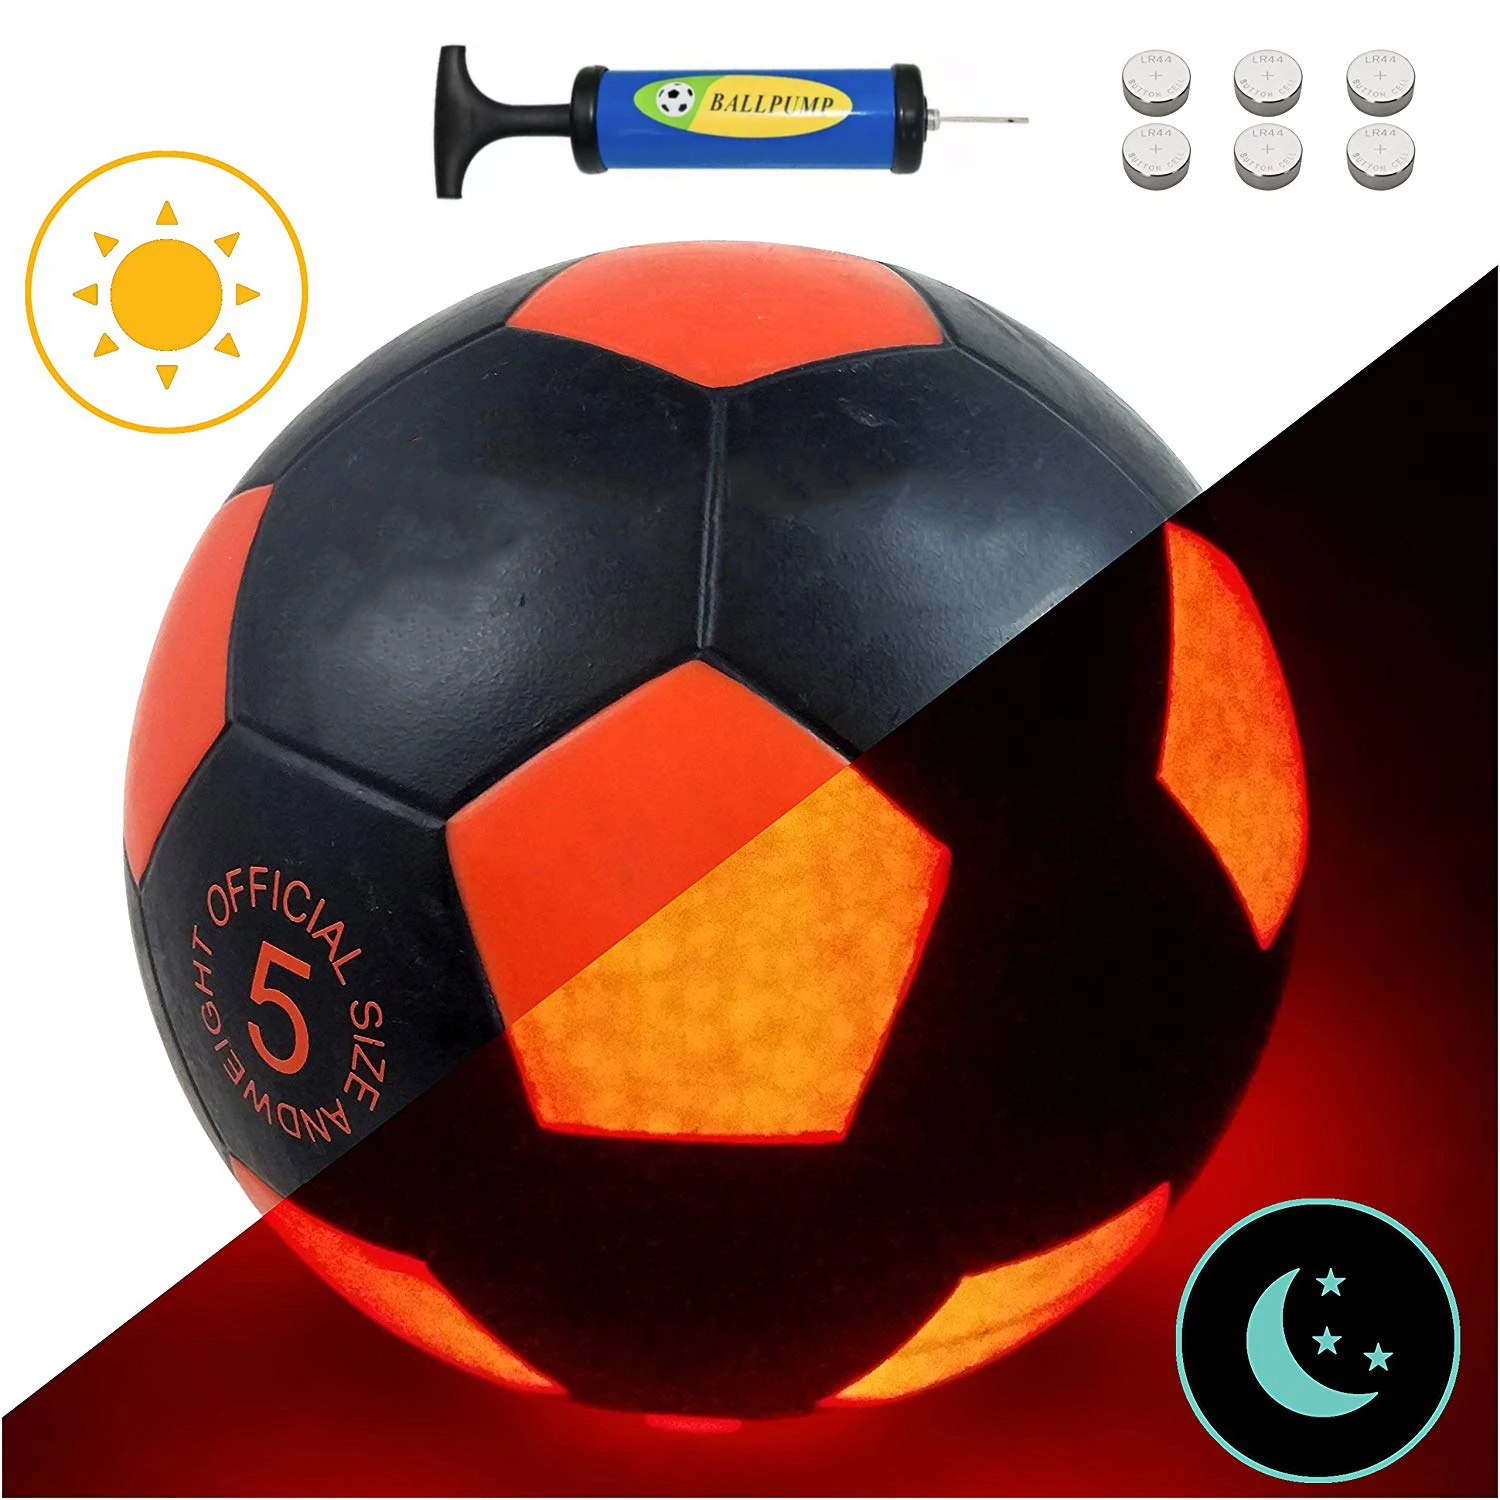 

Offical Size 5 Football Light Up LED Soccer Training Ball Blazing Red Edition Glows In The Dark Super Bright LED's Glowing Balls